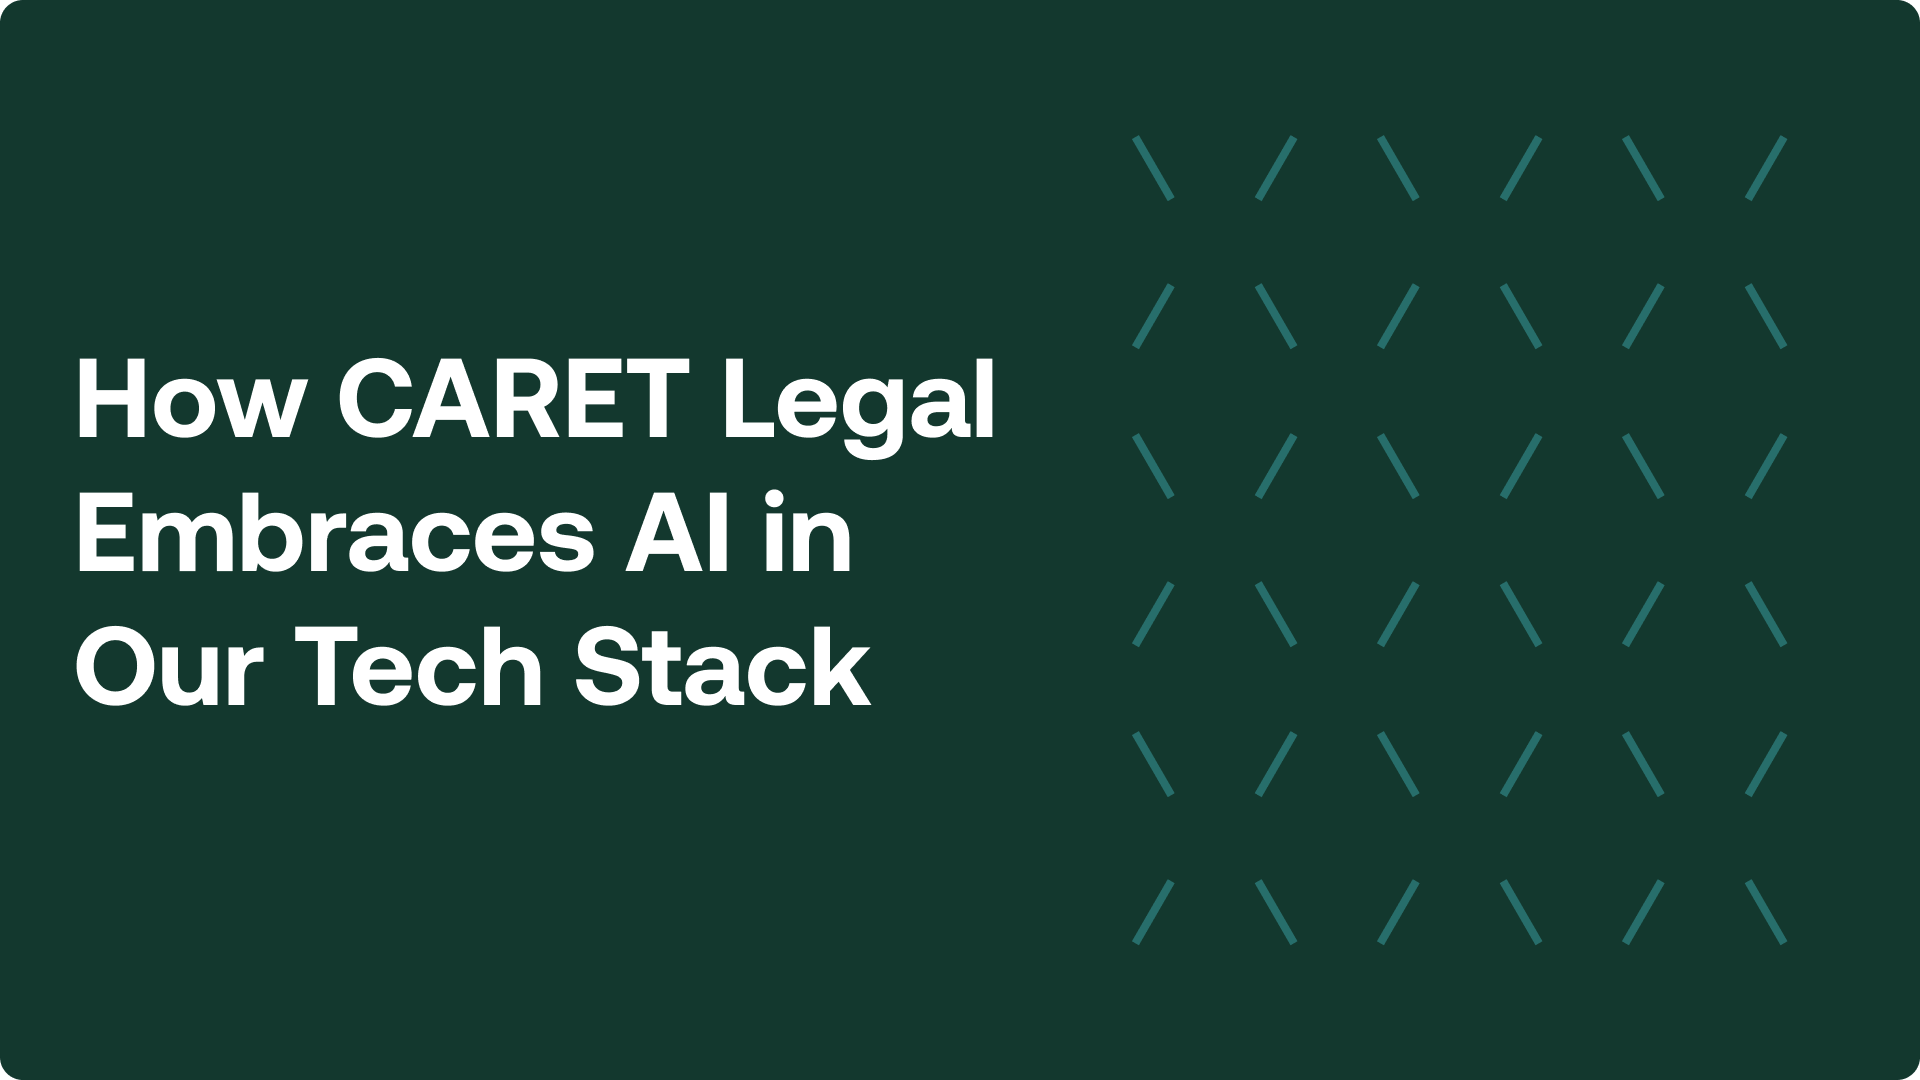 How CARET Legal Embraces AI in Our Tech Stack